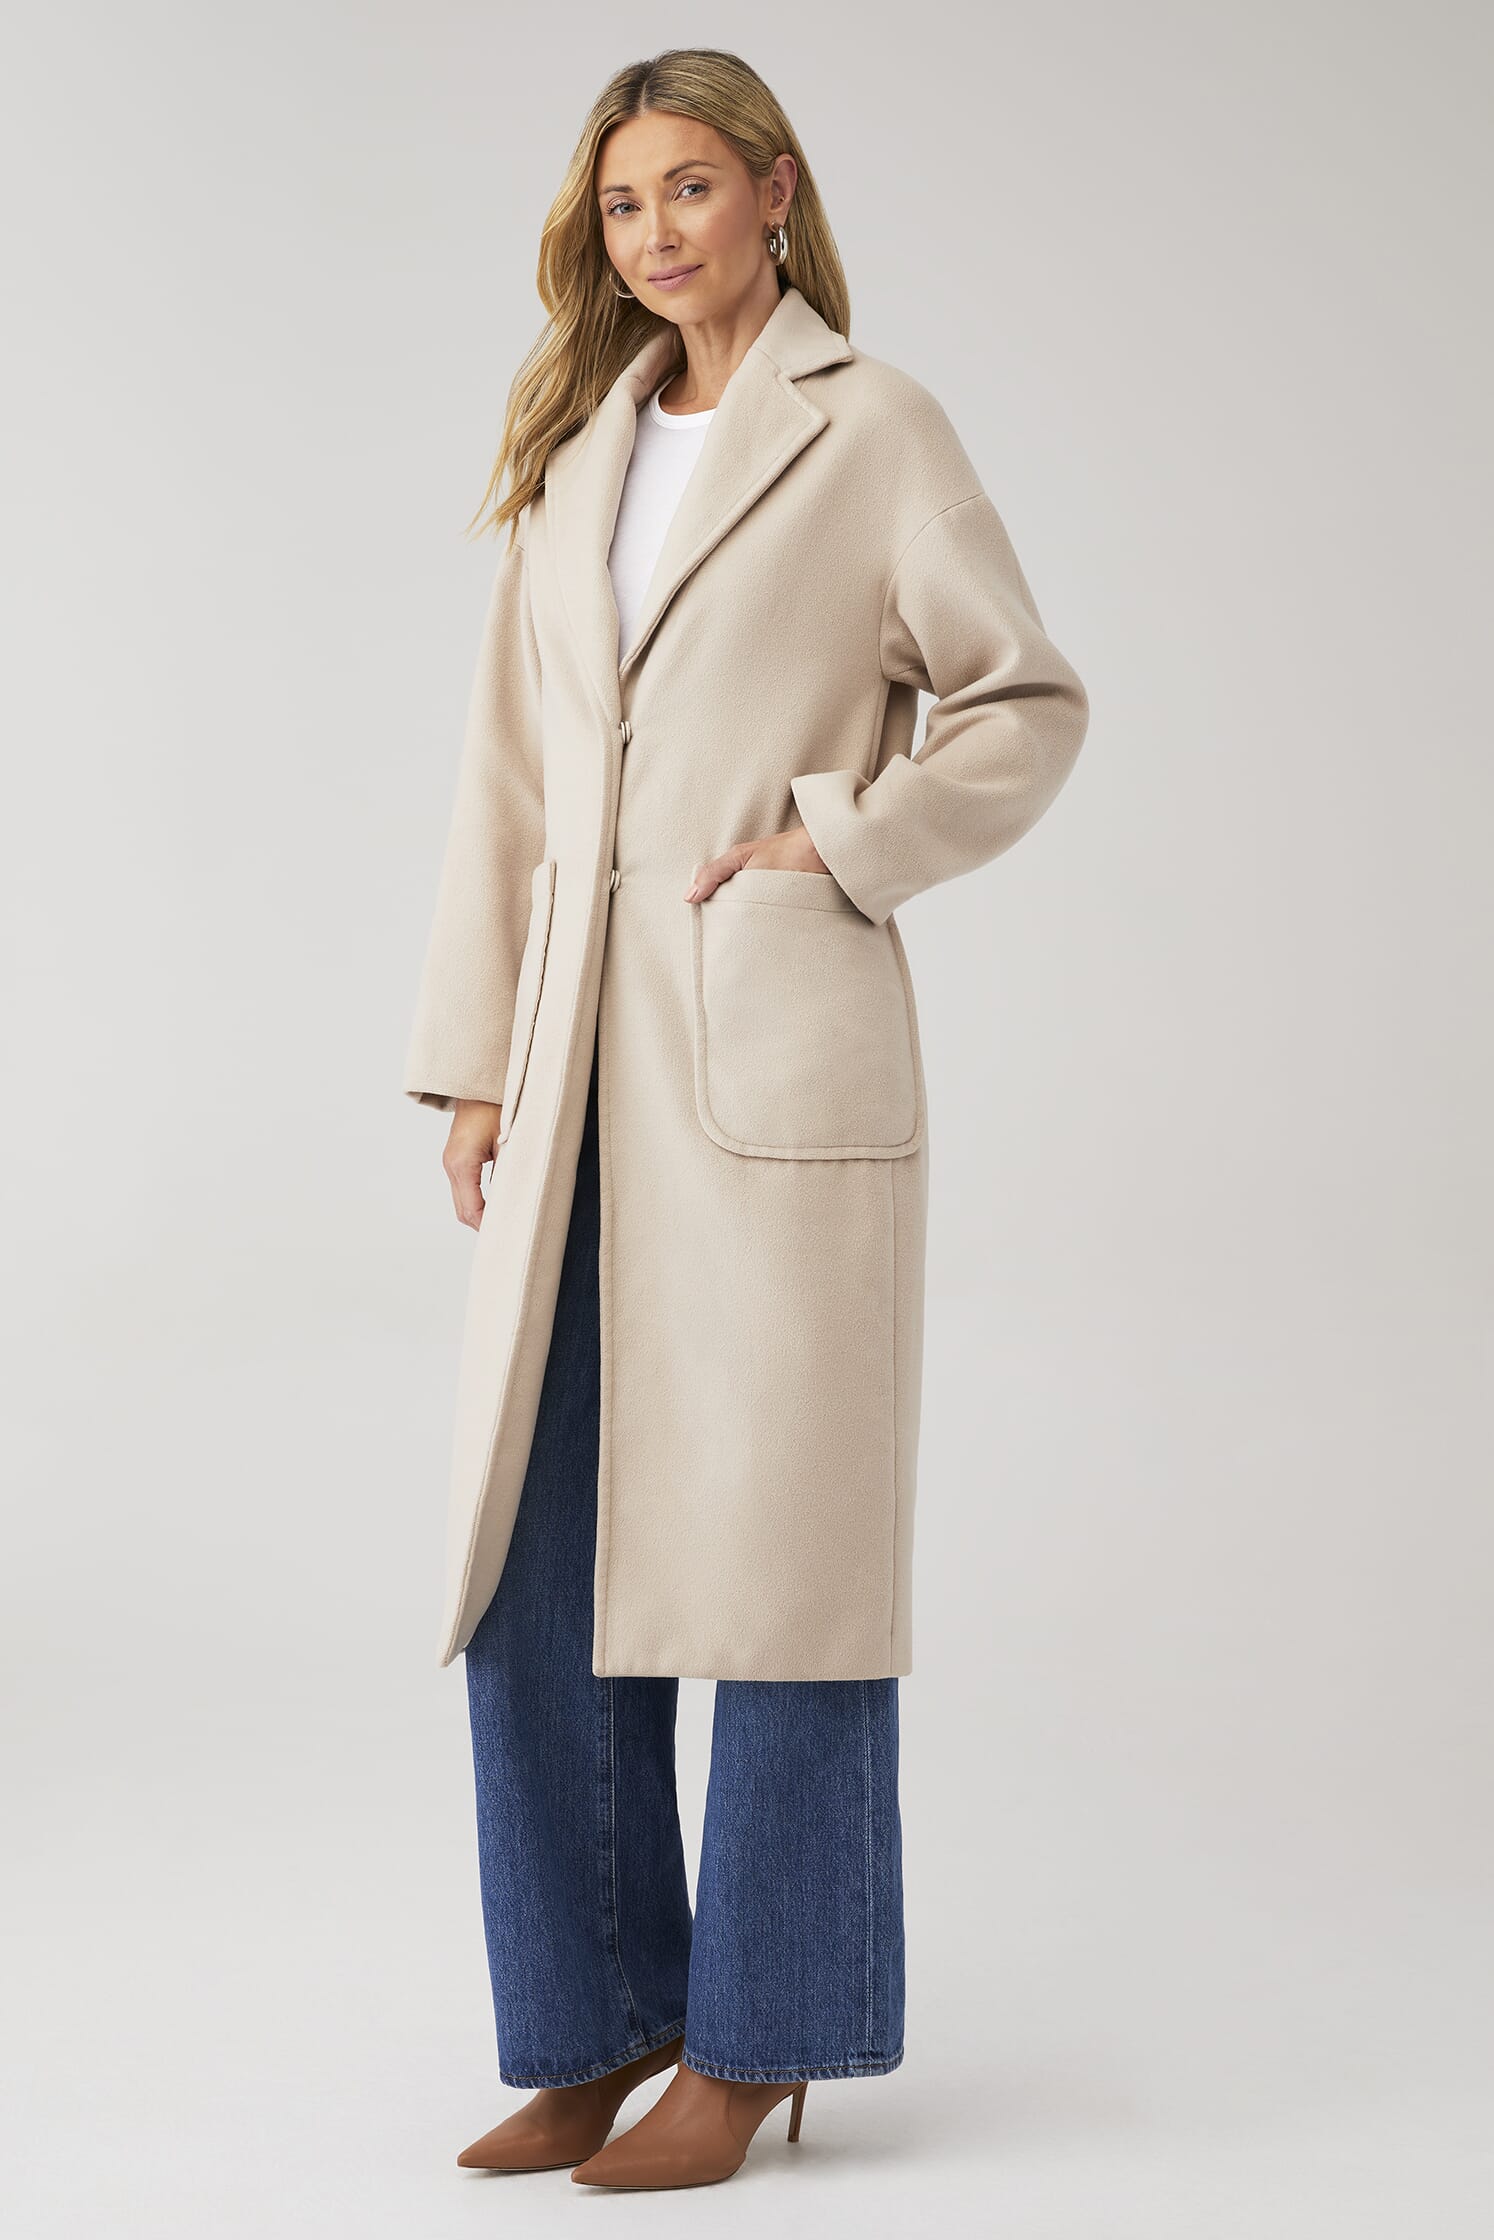 LBLC THE LABEL | Clifton Jacket in Taupe| FashionPass